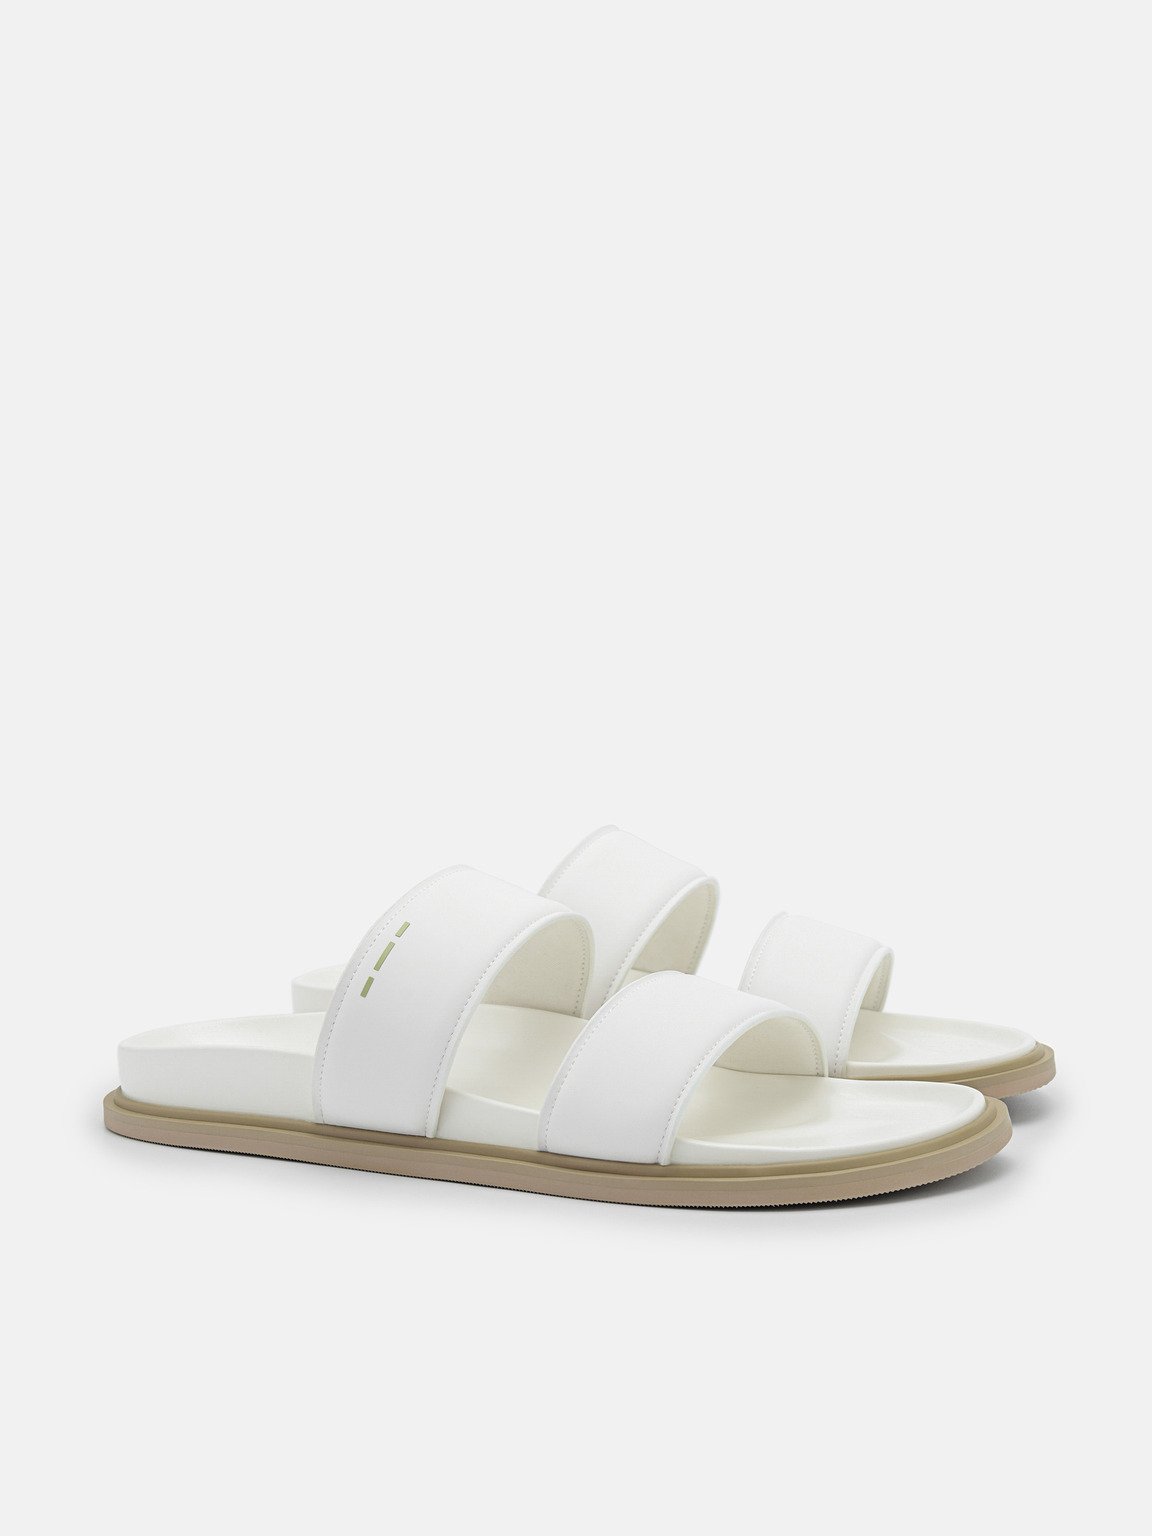 rePEDRO Recycled Leather Slide Sandals, White